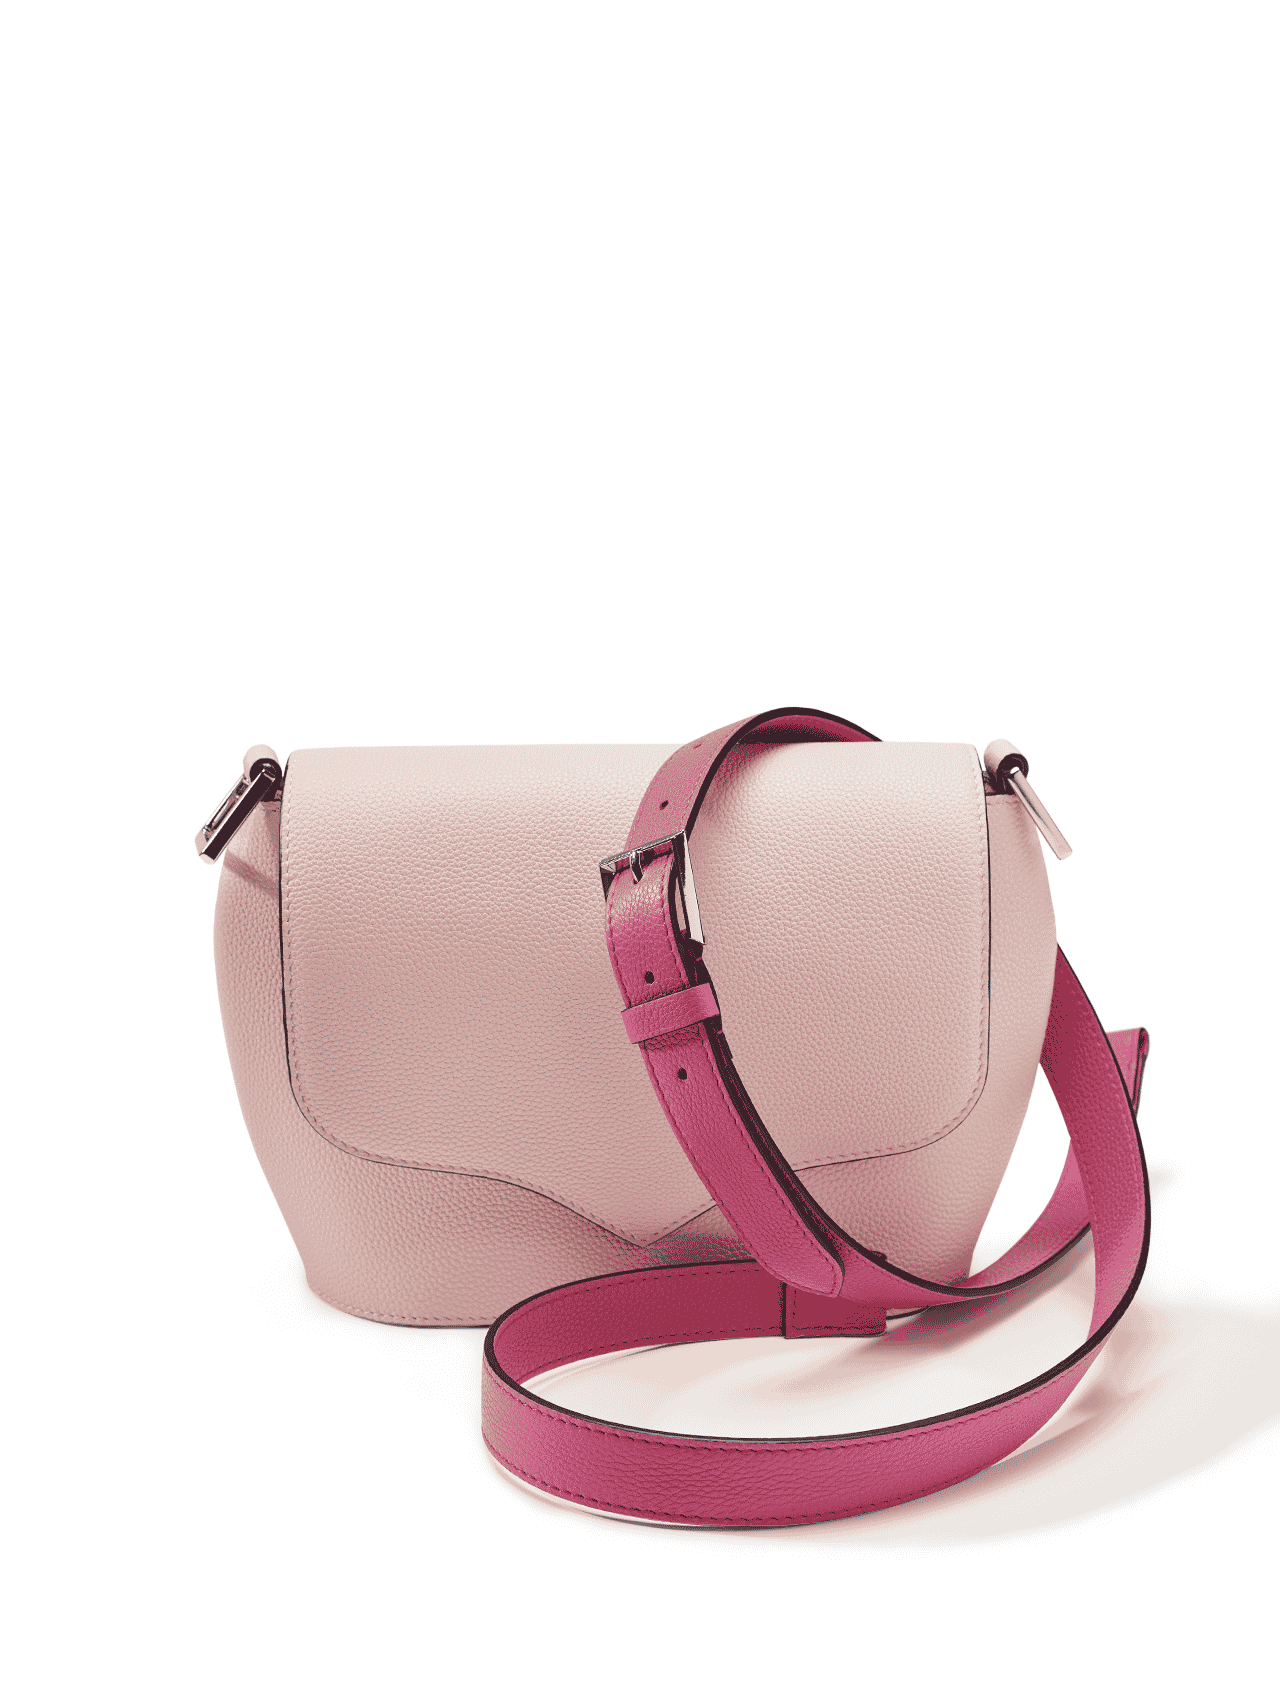 bag leather jean rousseau pink